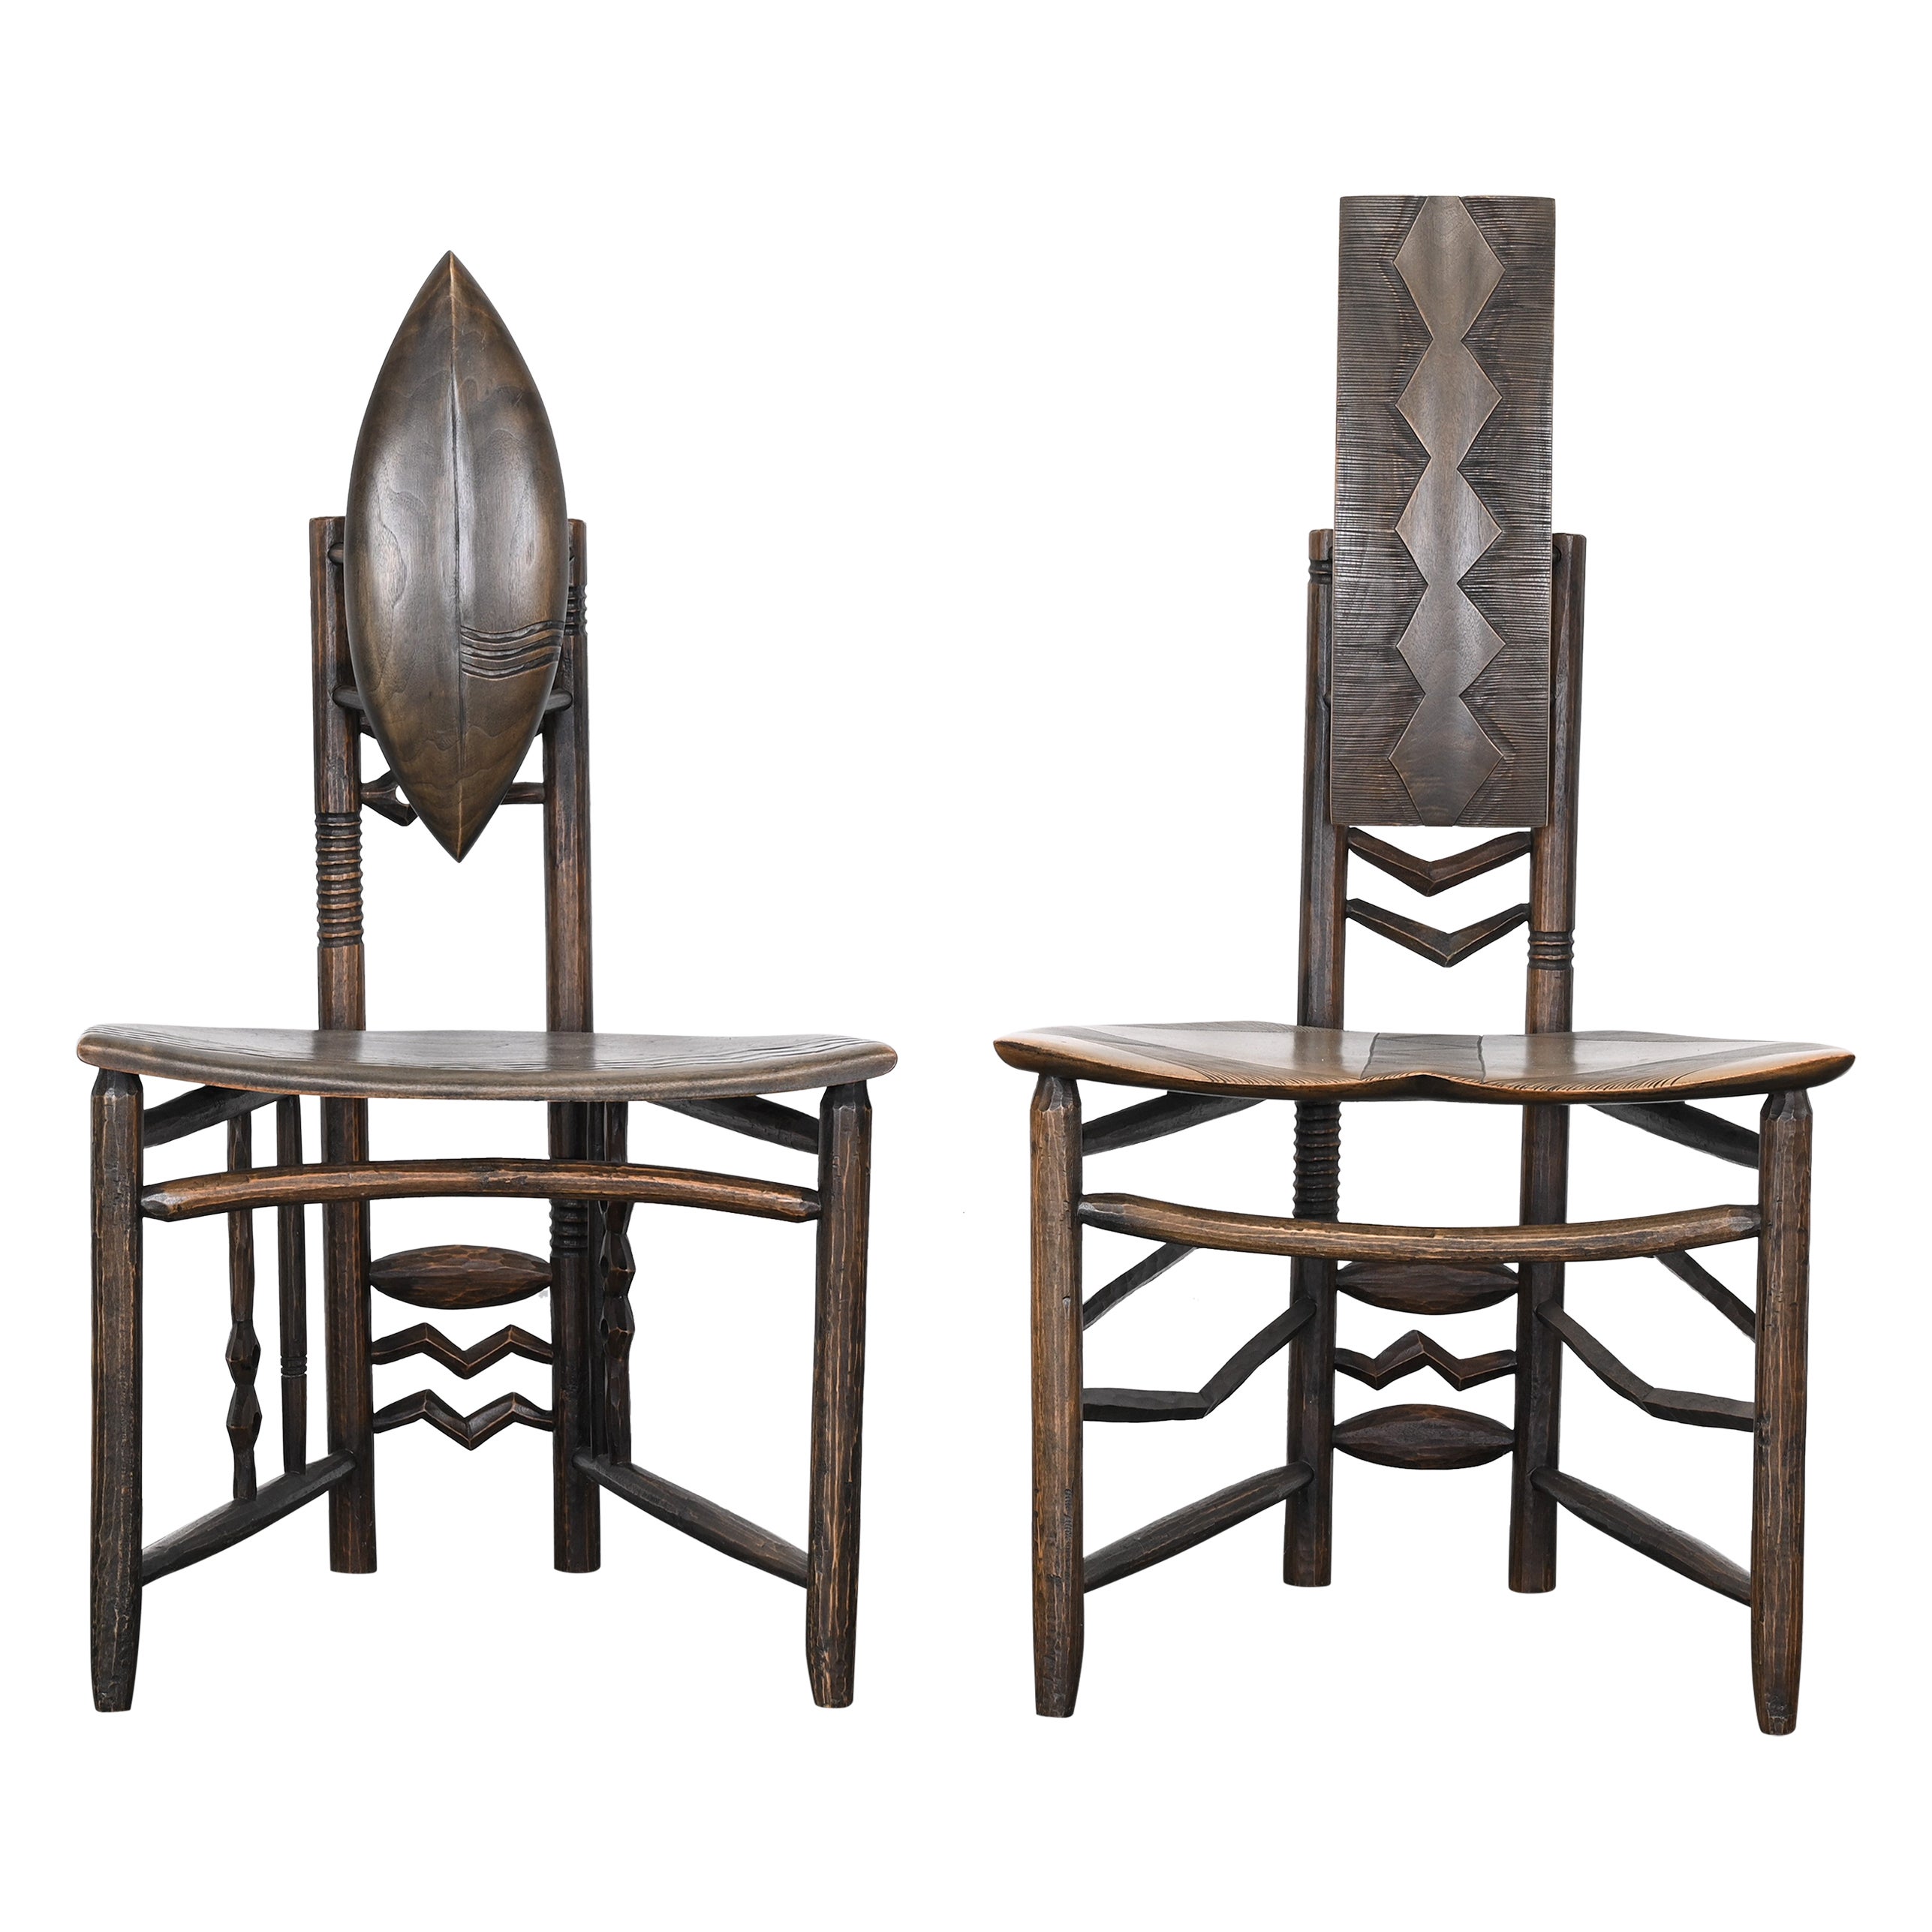 Signed Pair of African Chairs by Dean Pulver